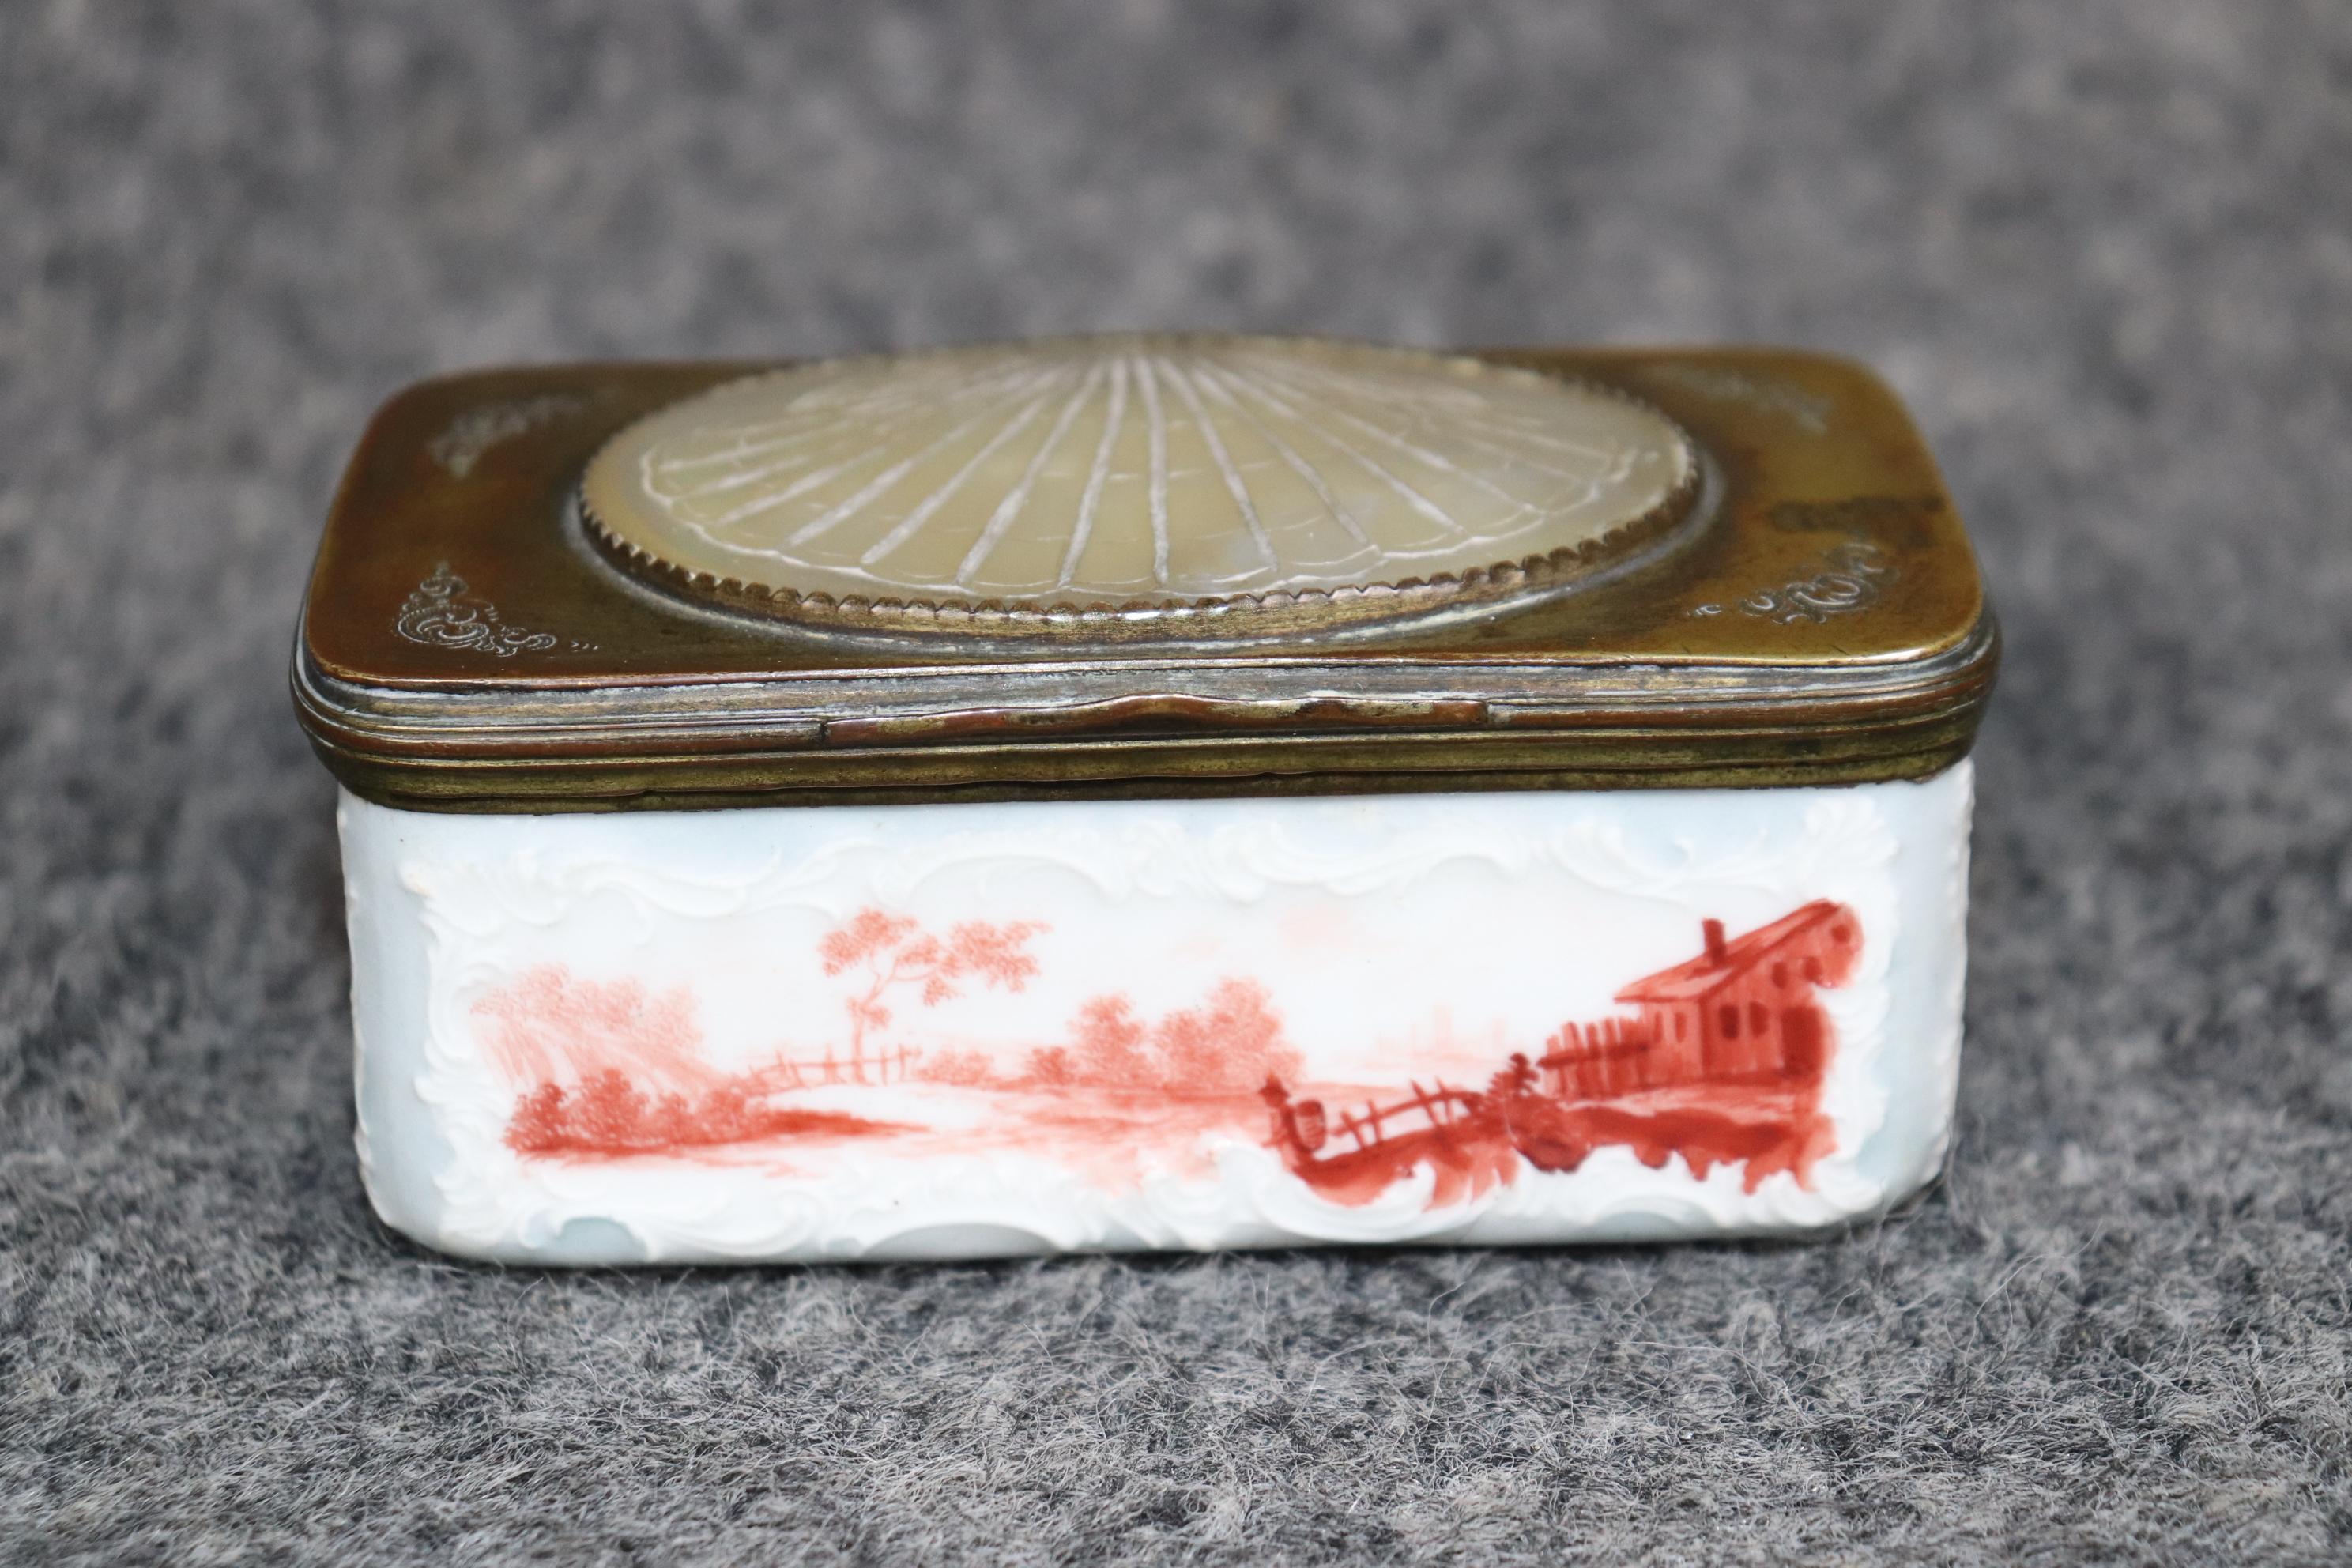 Dimensions - H: 1 3/4in W: 3 1/2in D: 2in 

This Mid 18th Century Porcelain and Bronze Box by Meissen is truly a spectacular piece and is of the highest quality! If you look at the photos provided you will see the attention to detail within the